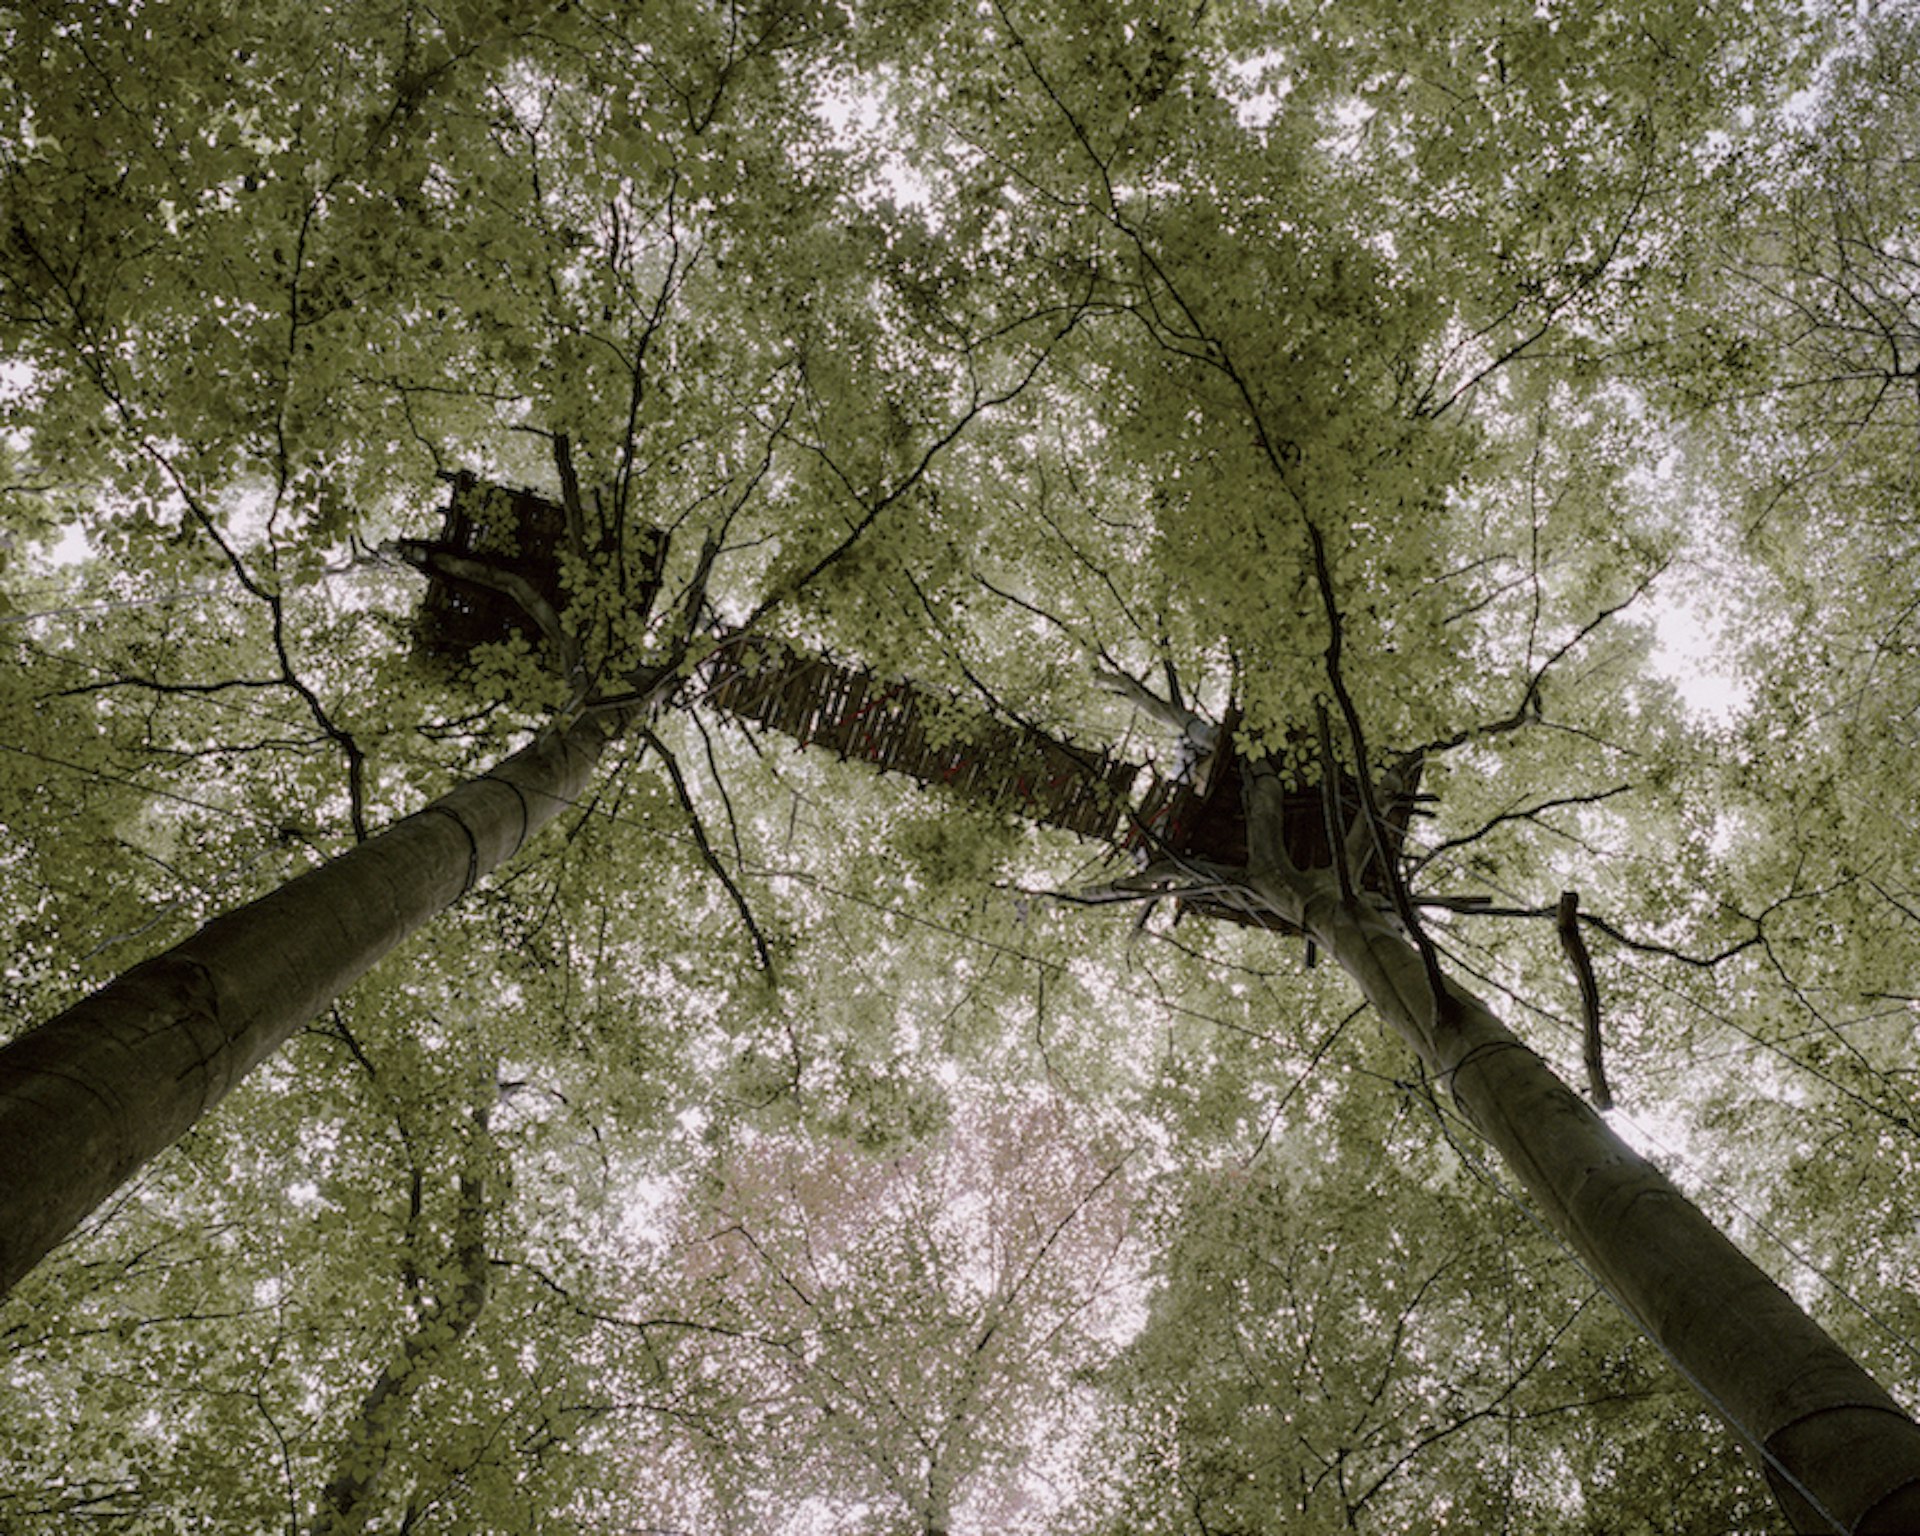 A worm's eye view of a treehouse high in the trees of the forest